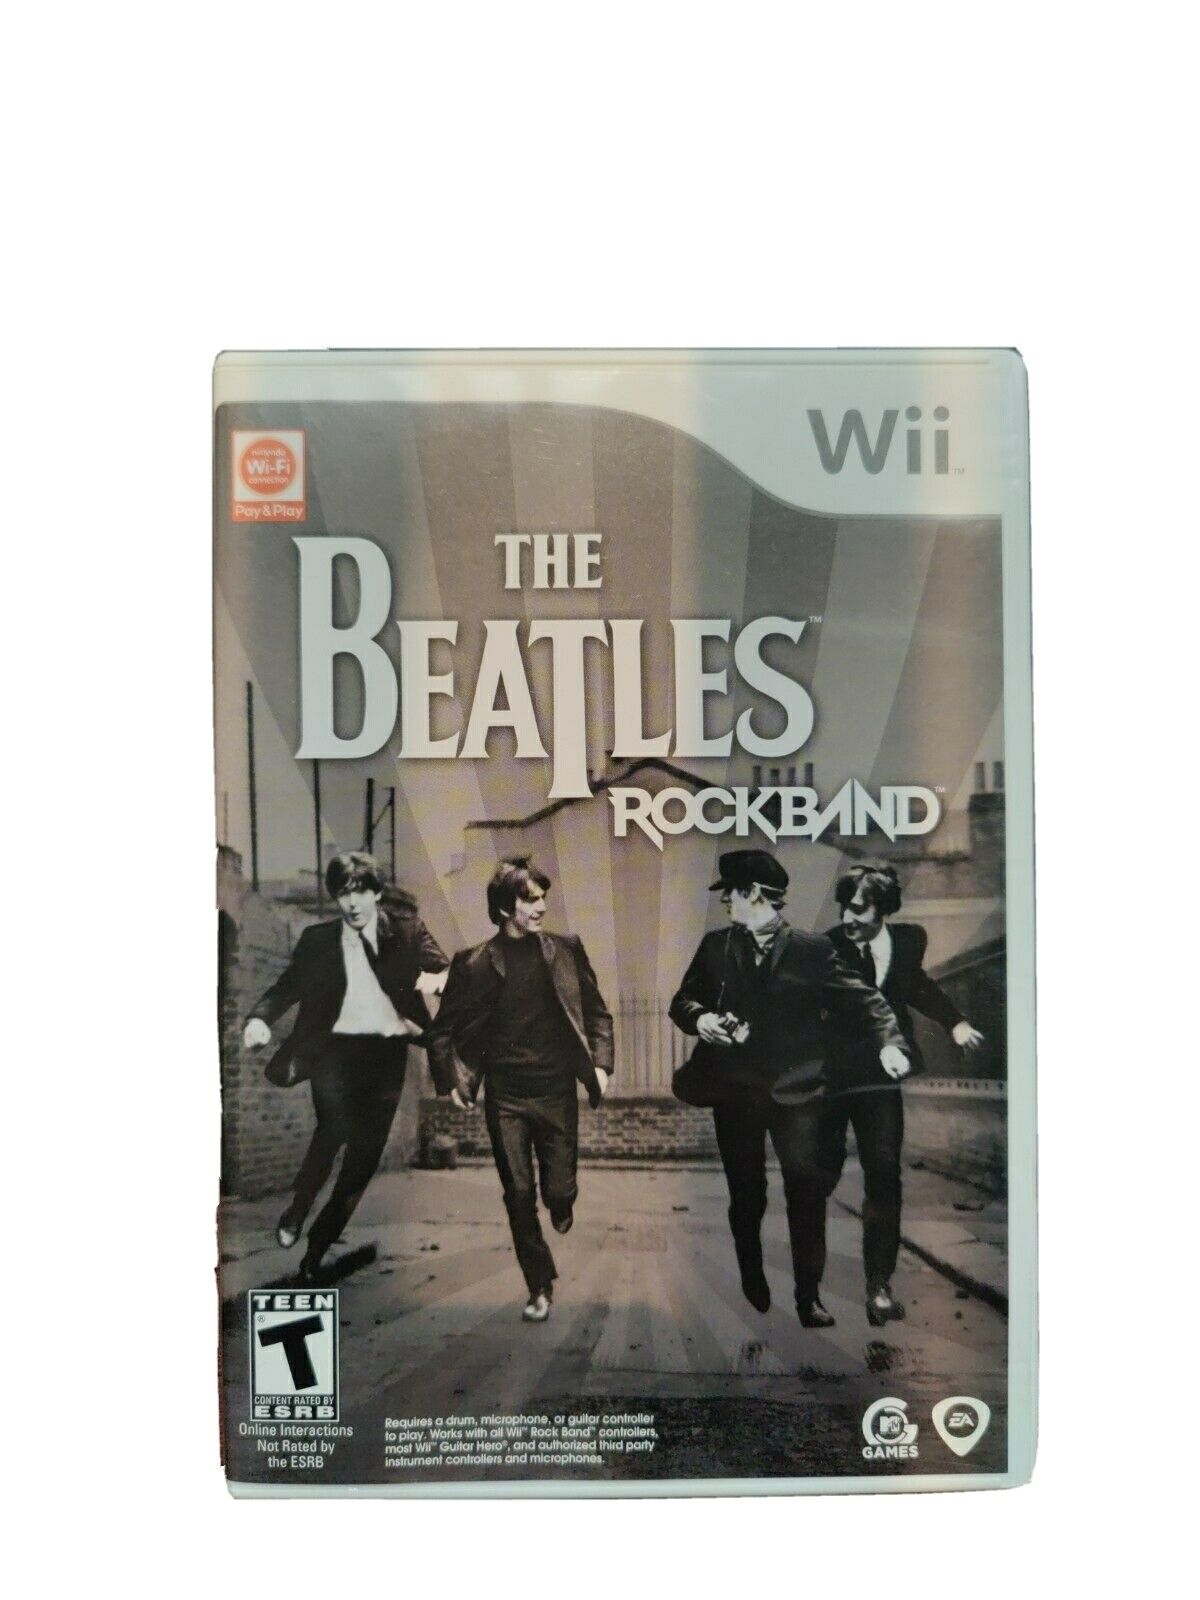 THE BEATLES Rockband -- Nintendo Wii -- EA Games -- Complete, Tested Working